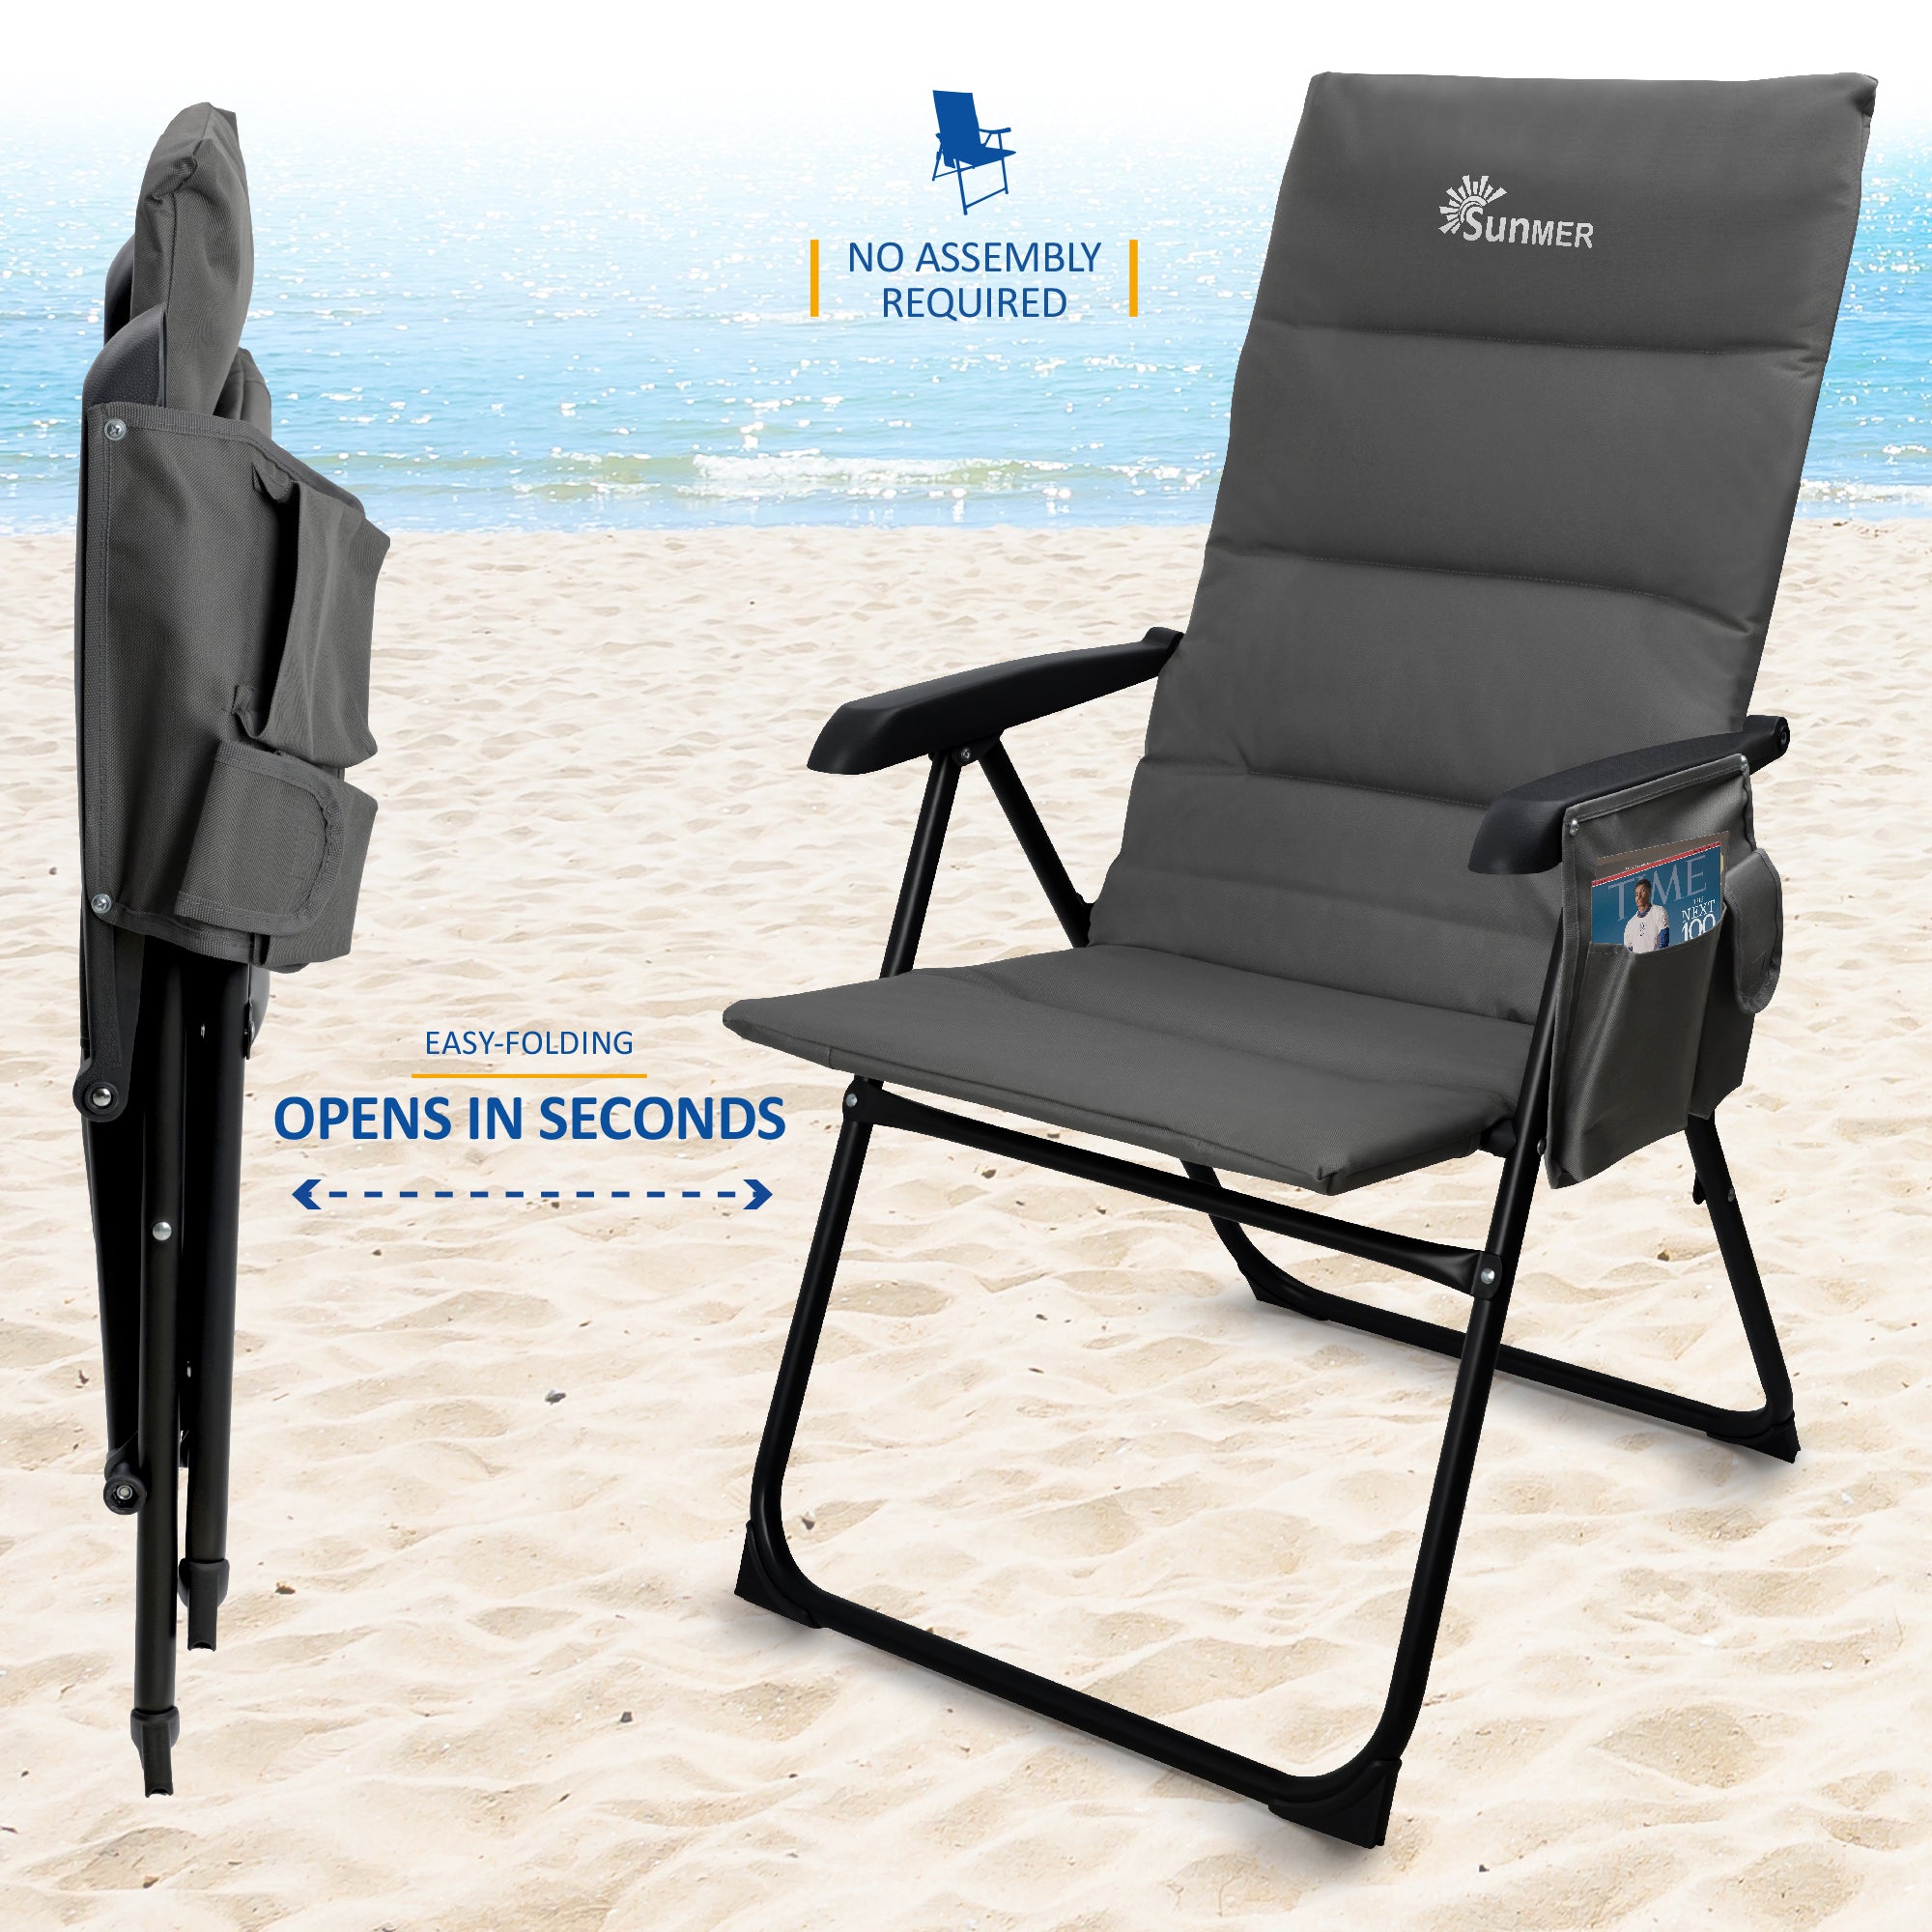 SUNMER Set of 2 Folding Padded Deck Chairs with 5 Reclining Positions